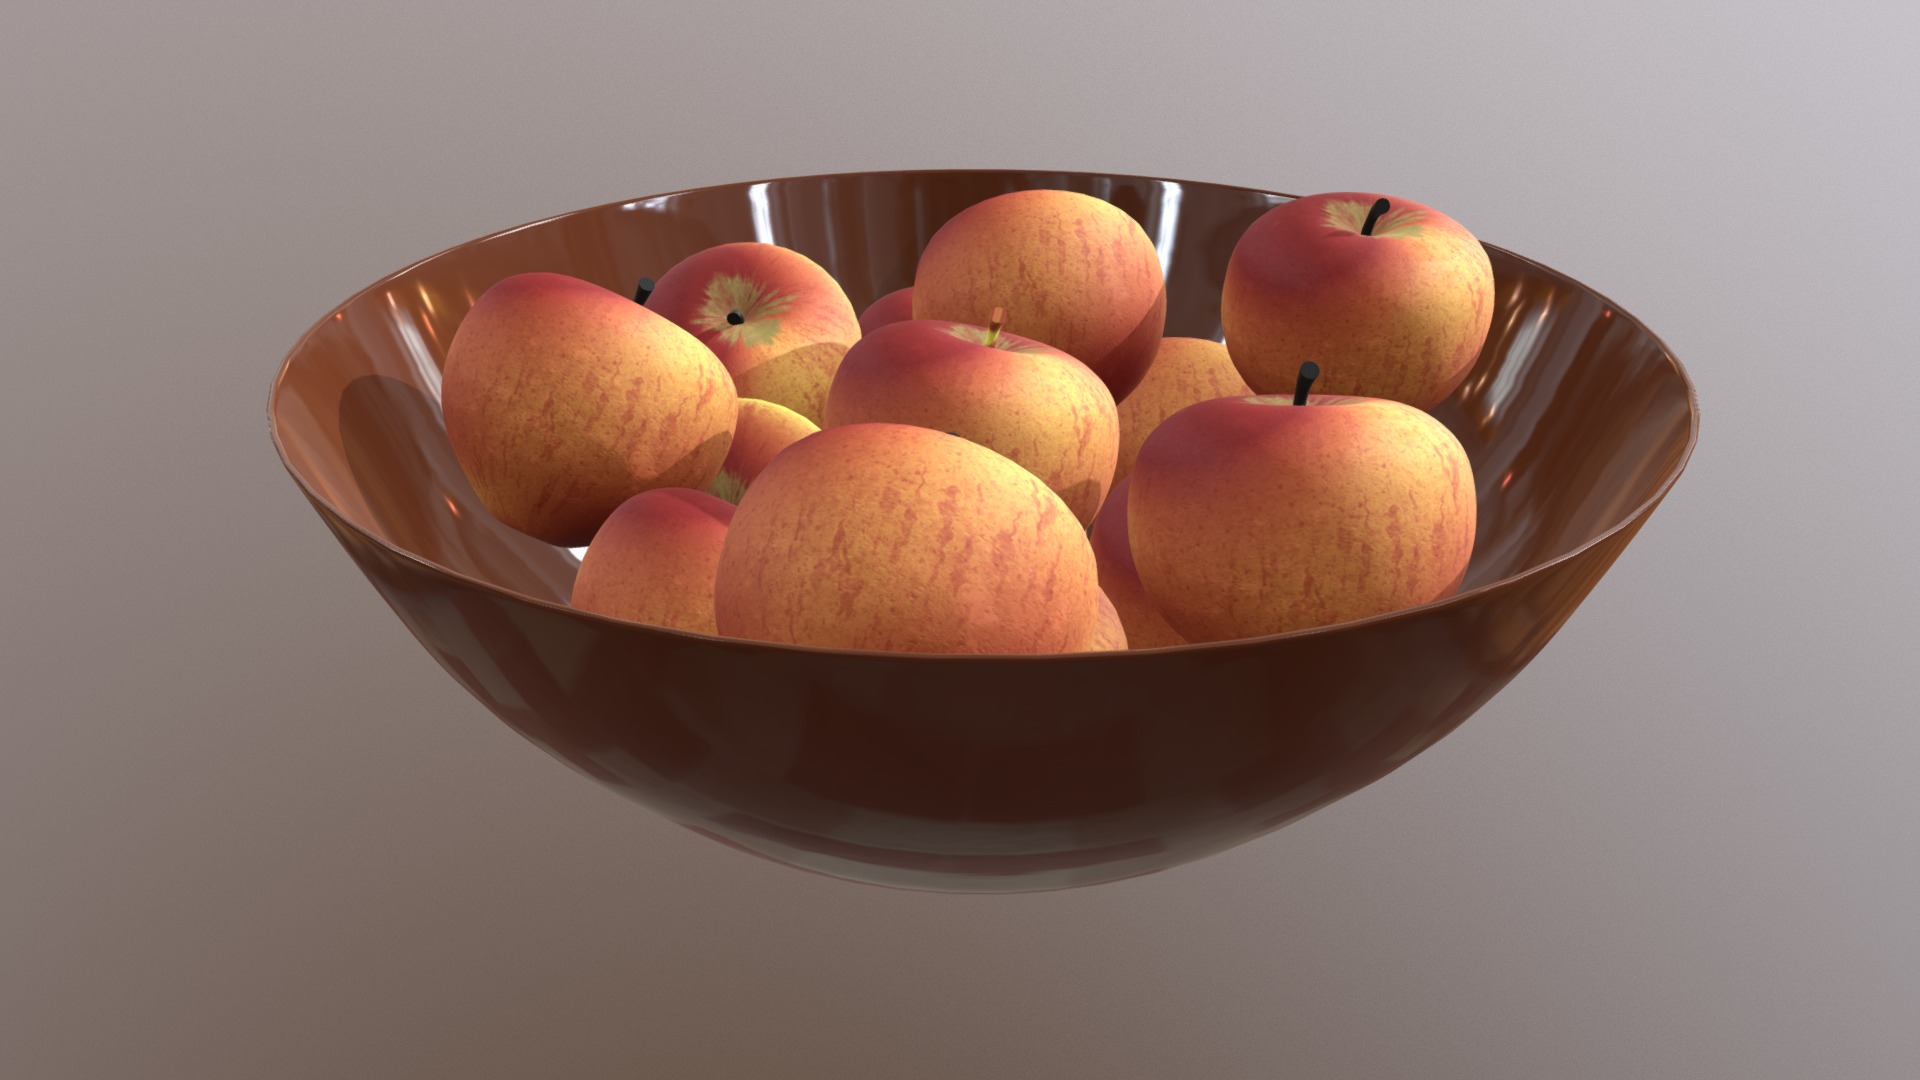 3D model Apples - This is a 3D model of the Apples. The 3D model is about a bowl of oranges.